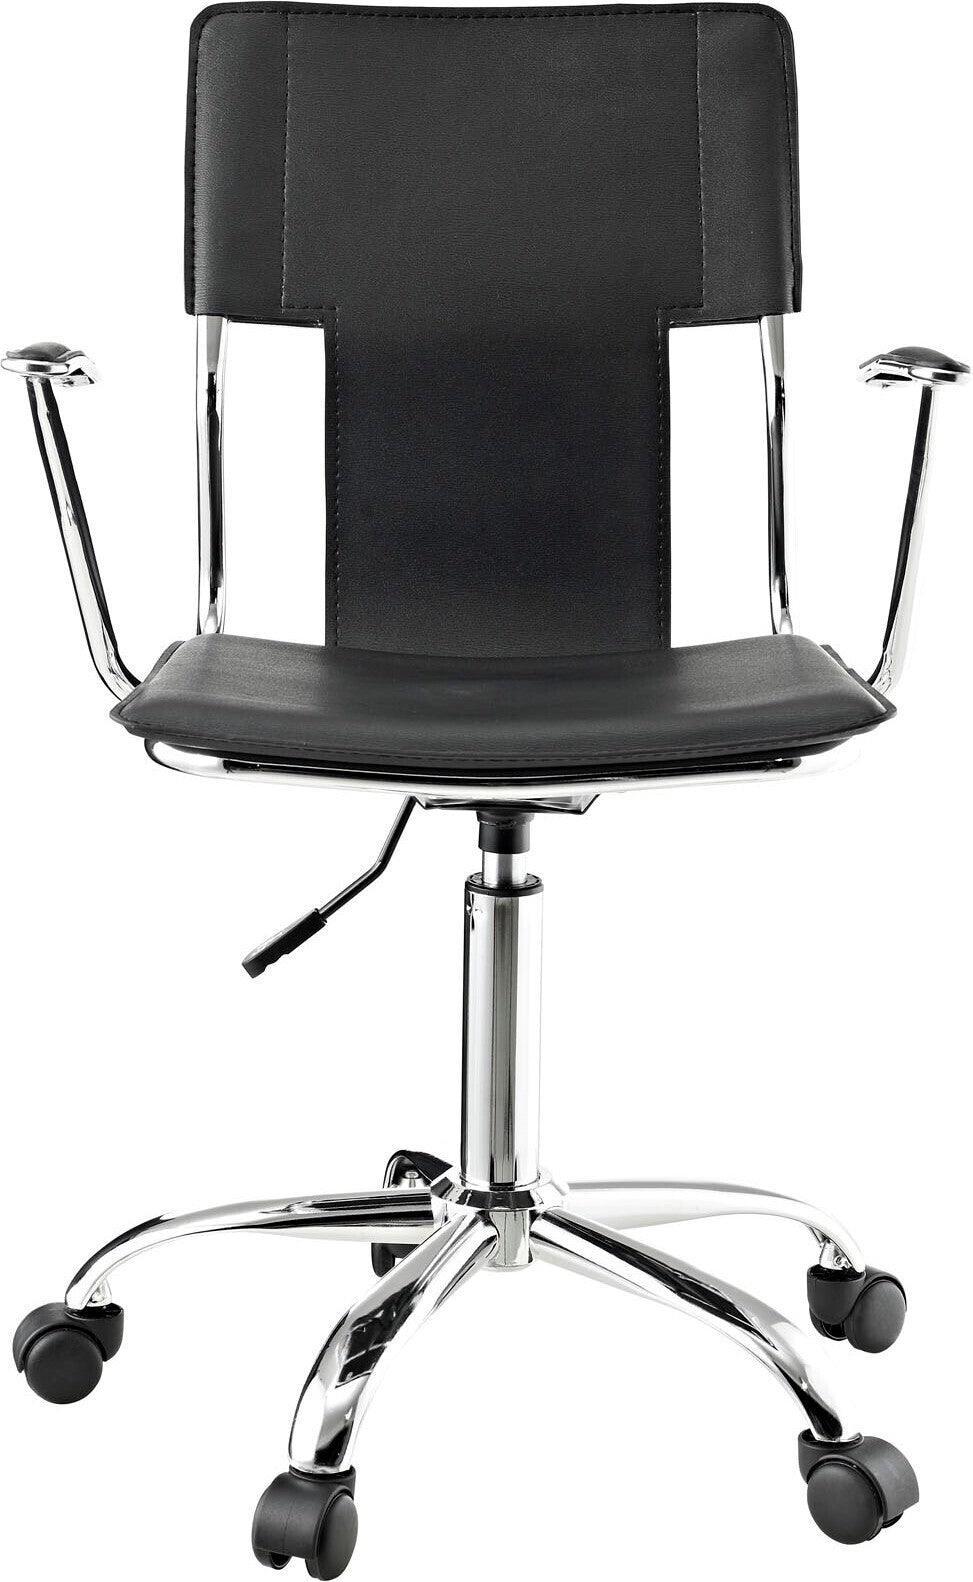 Modway Task Chairs - Studio Office Chair Black